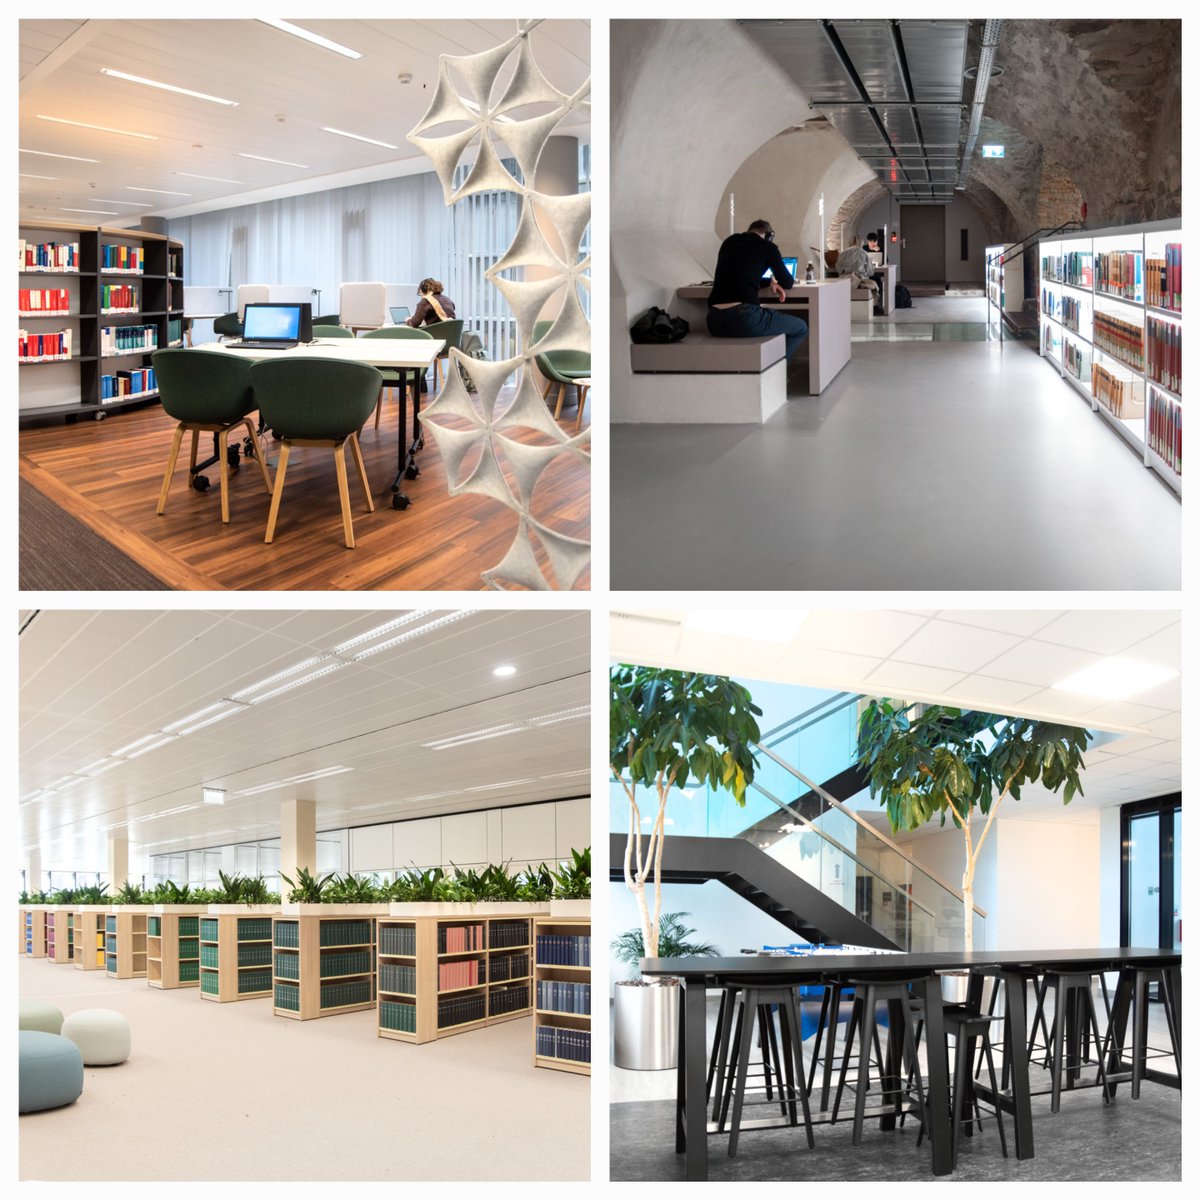 THE ACADEMIC LIBRARY - The new academic library enables collaboration, meeting and engagement. Need some inspiration? #Universitylibraries #mentalhealth thedesignconcept.co.uk/projects/ #CILIPIreLAI24 #biophilicdesign #HealthandWellbeing #librarydesign #academiclibraries #schoolLibraries